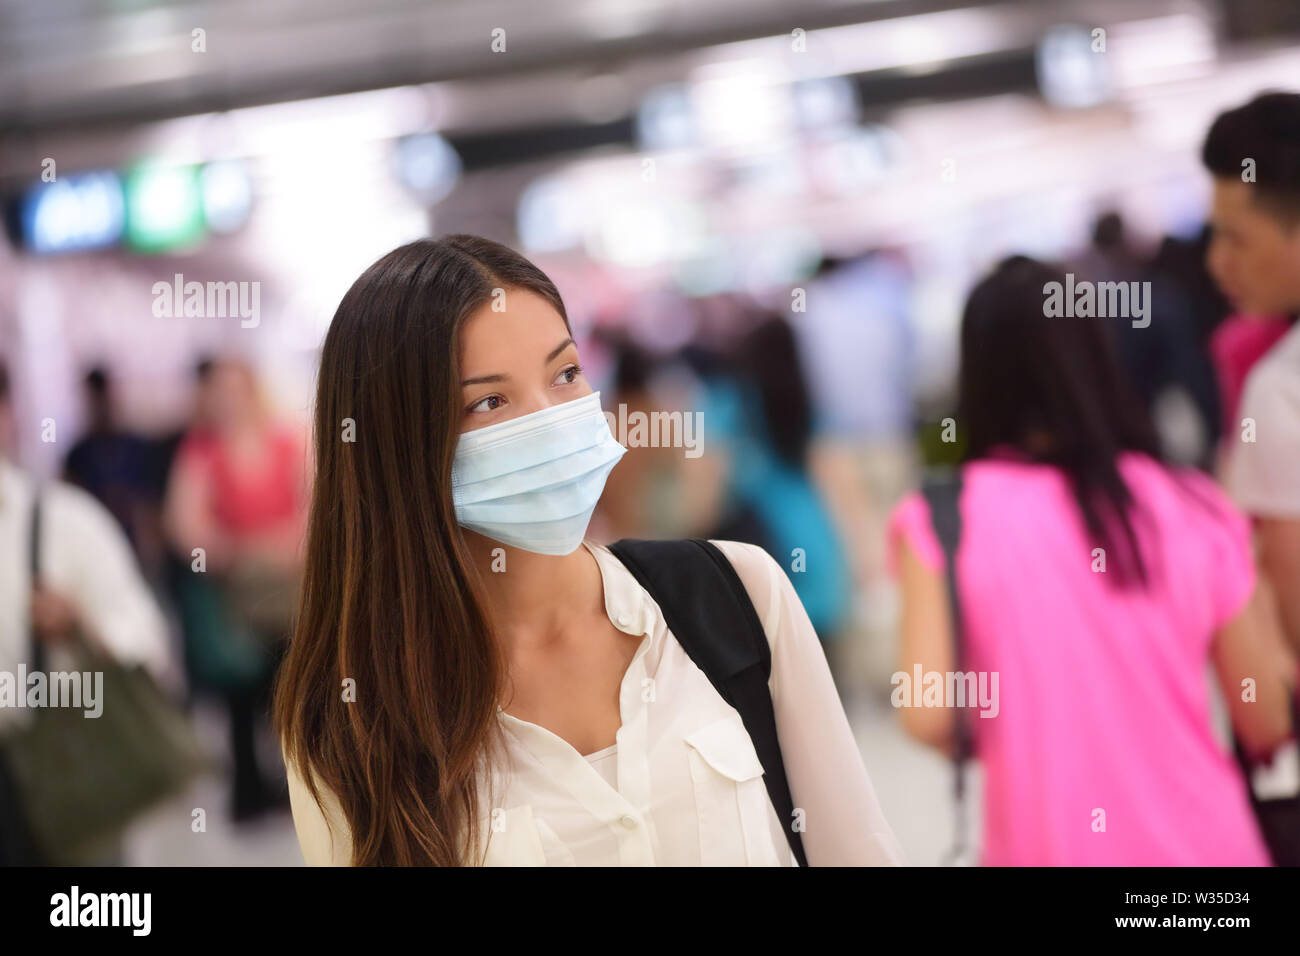 Person wearing protective mask against transmissible infectious diseases and as protection against pollution and the flu. Asian woman commuter in airport public area. Stock Photo